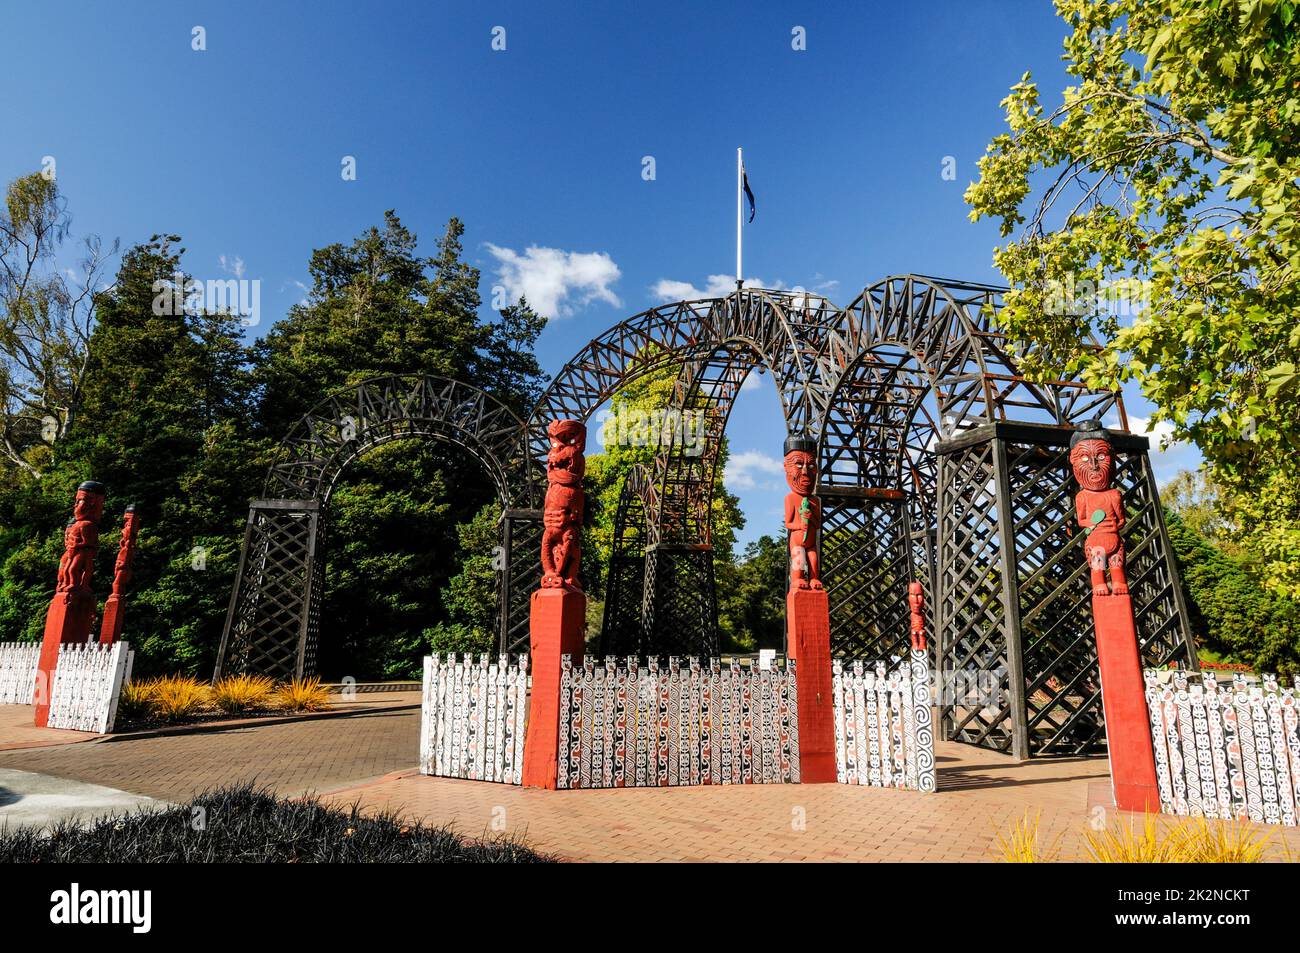 PrinceÕs Gate Archway leading into QueenÕs Drive to the Government Gardens in Rotorua, a town on the shore of lake Rotorua on New Zealand's North Isla Stock Photo